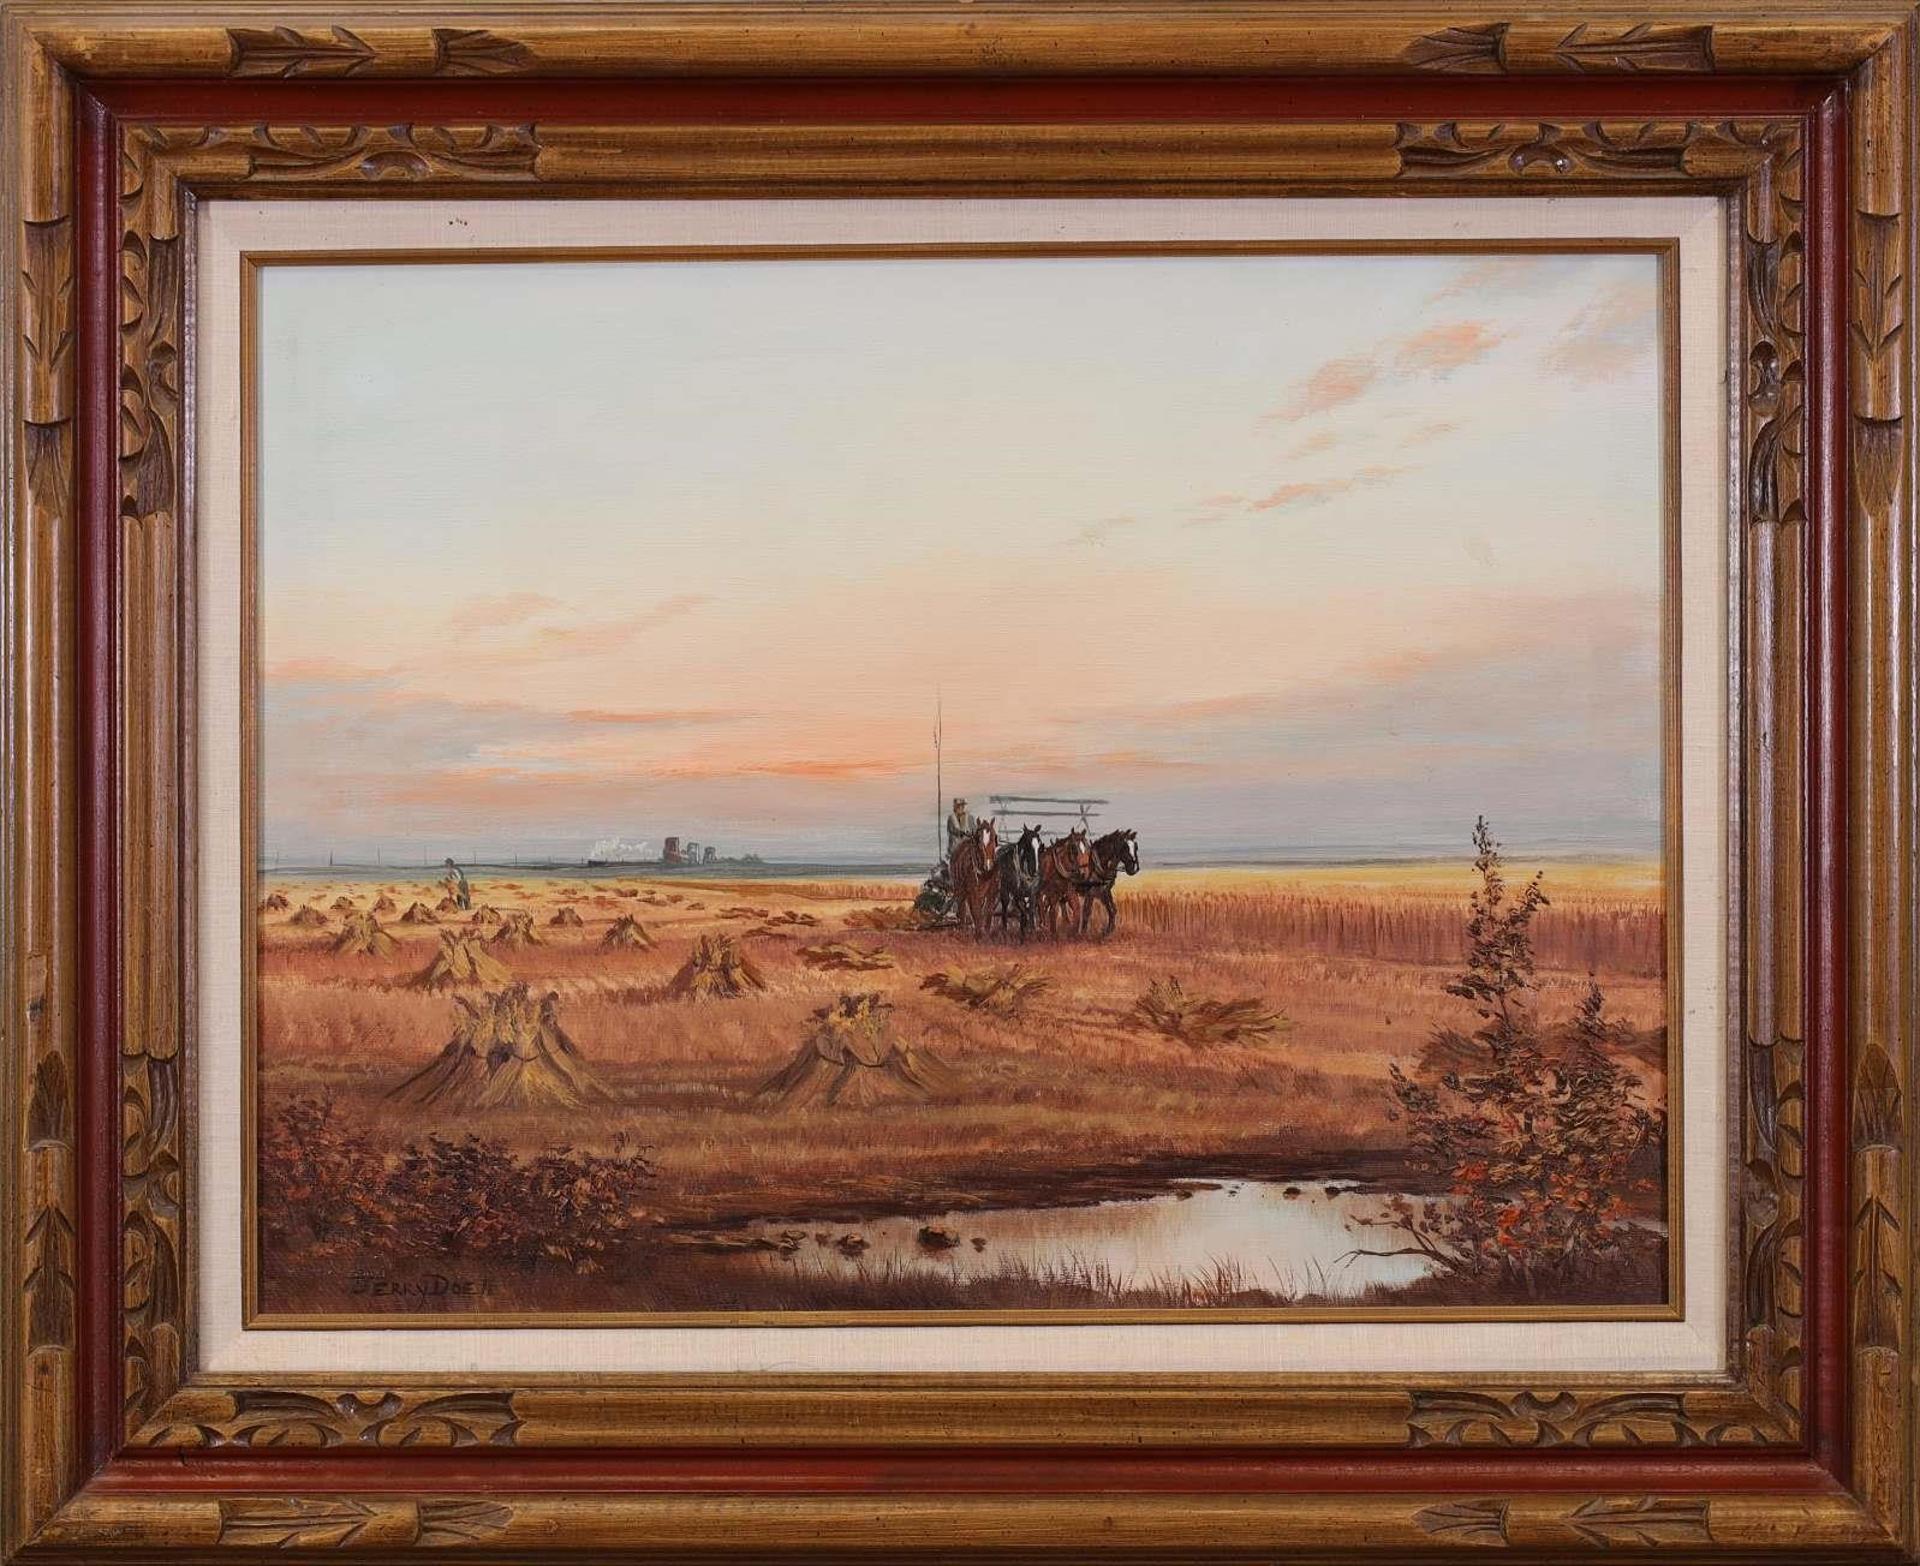 Jerry Doell (1938-2005) - Untitled, Harvest Time